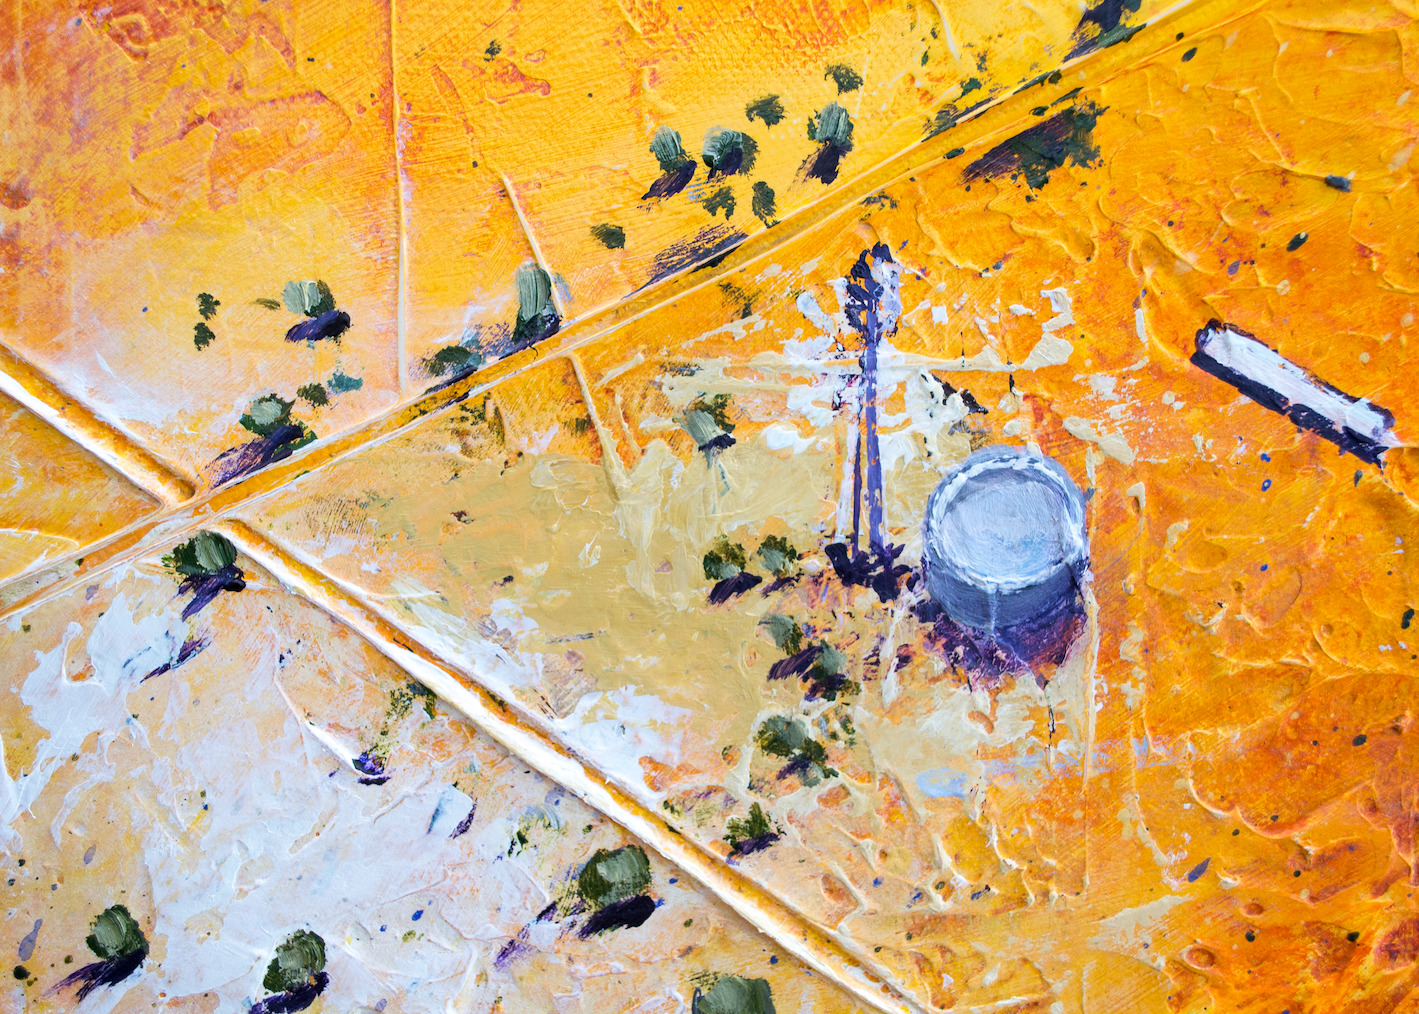 Close Up Detail Of Acrylic Painting "Water Trough" By Louis Dalozzo